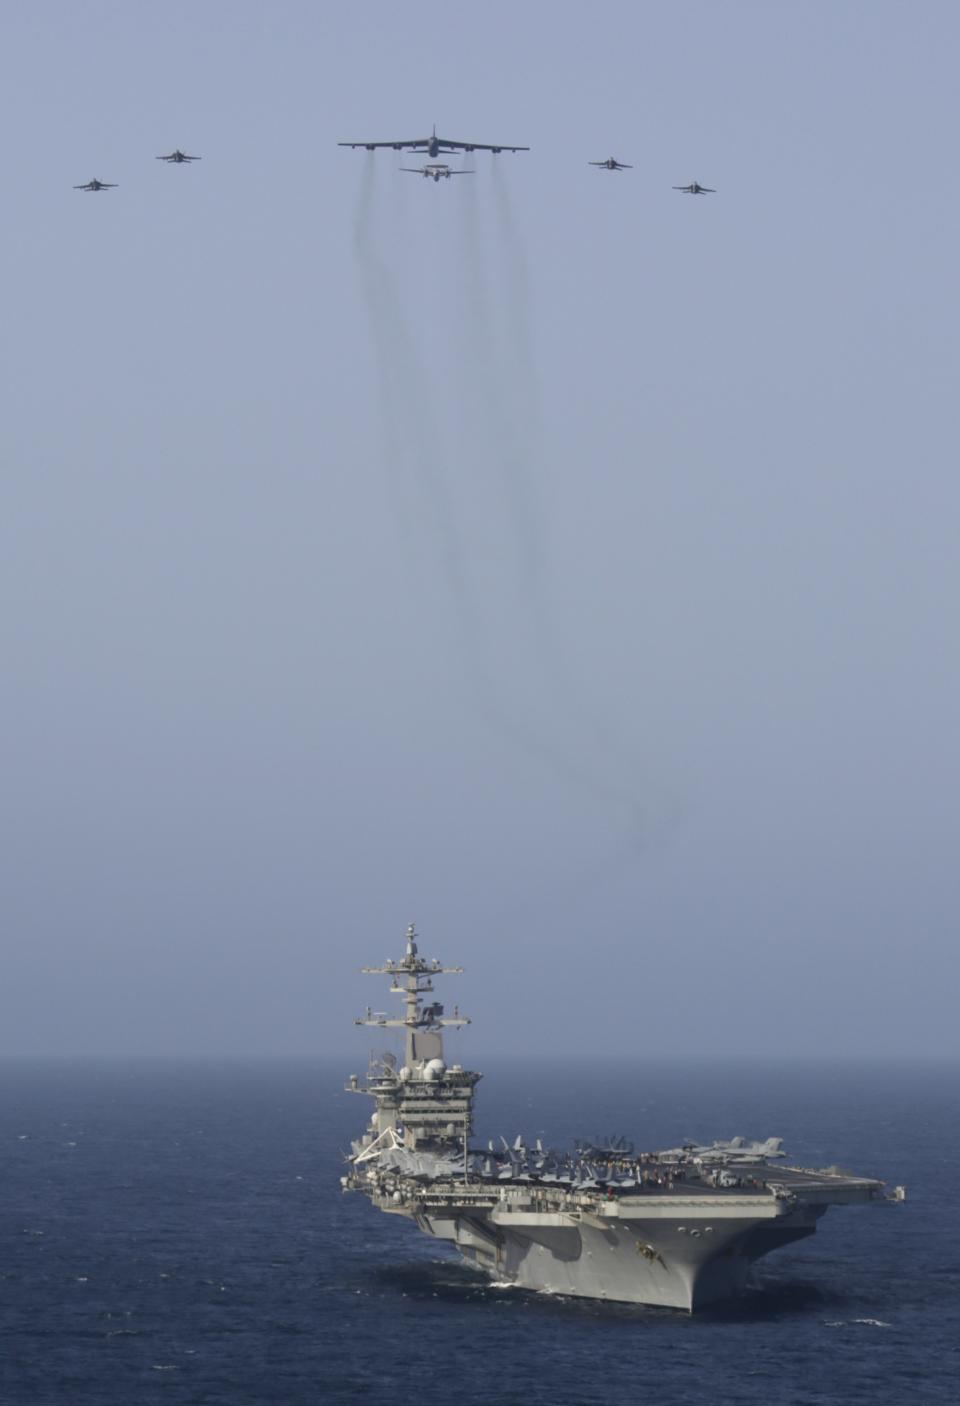 In this Saturday, June 1, 2019 photo, Abraham Lincoln Carrier Strike Group and a U.S. Air Force B-52H Stratofortress, assigned to the 20th Expeditionary Bomb Squadron and part of the Bomber Task Force deployed to the region, conduct joint exercises in the U.S. Central Command area of responsibility in Arabian sea. (Mass Communication Specialist 1st Class Brian M. Wilbur/U.S. Navy via AP)